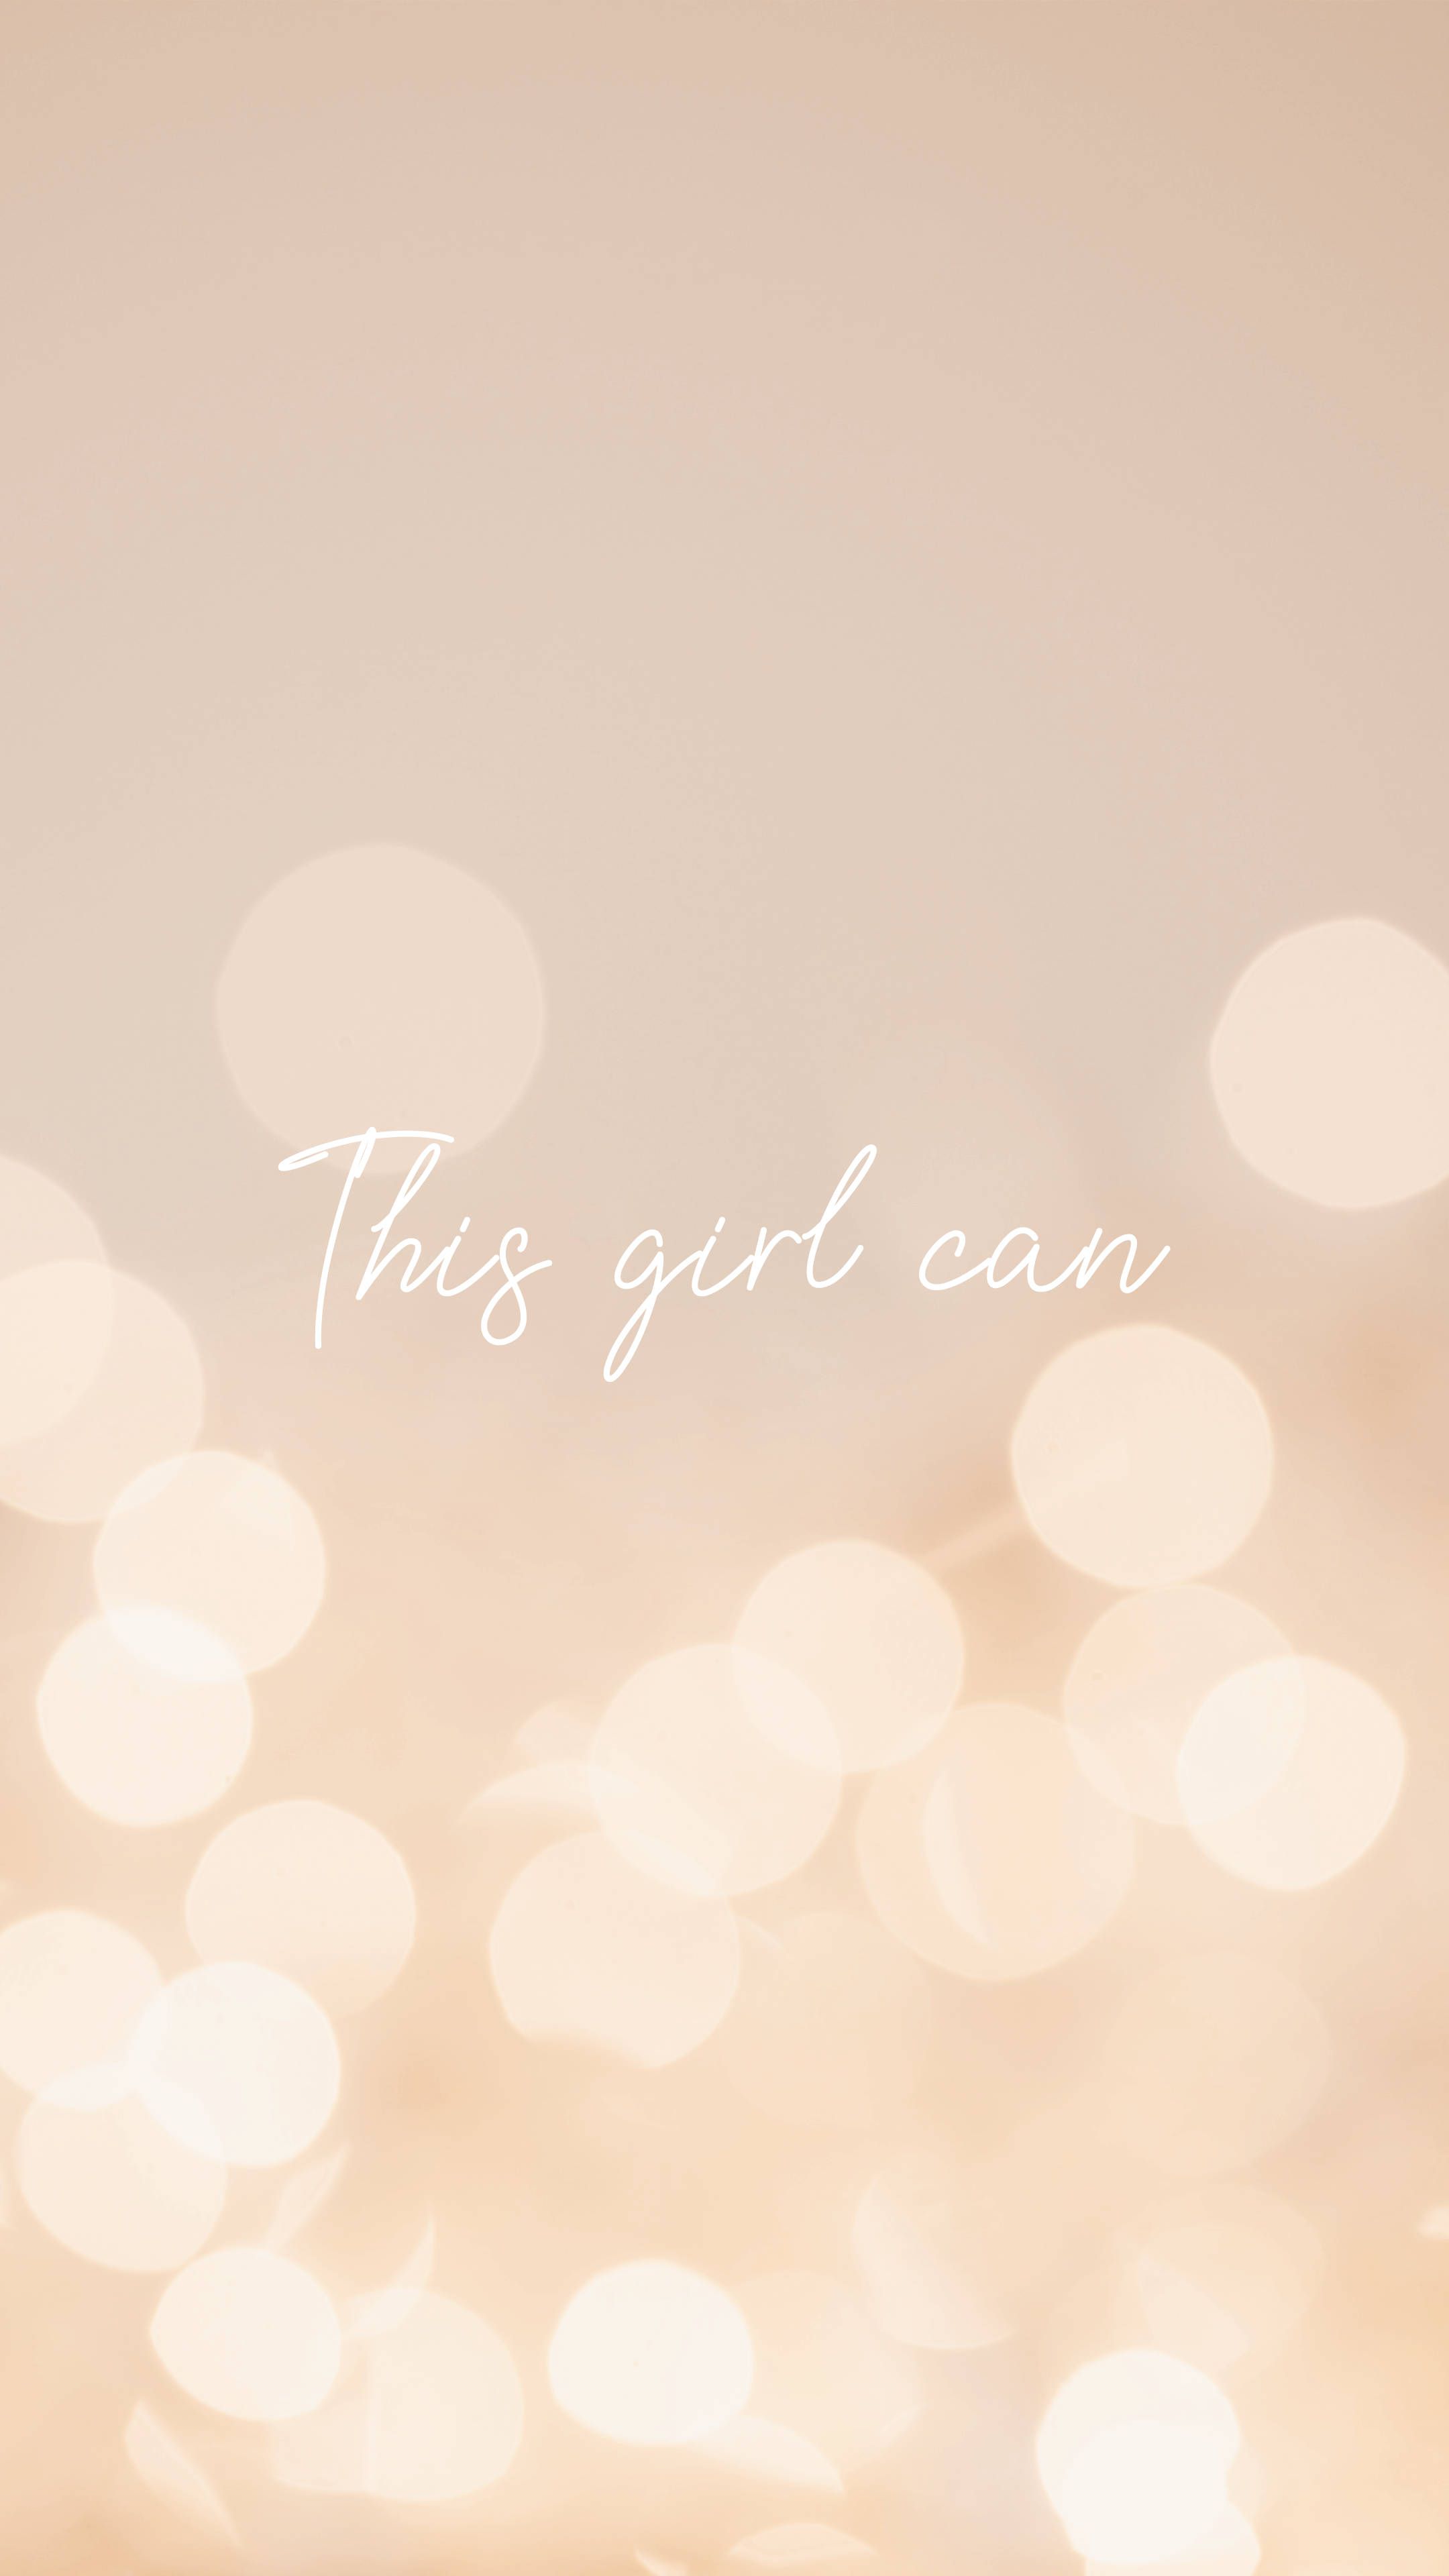 Download This Girl Can Cream Aesthetic Wallpaper